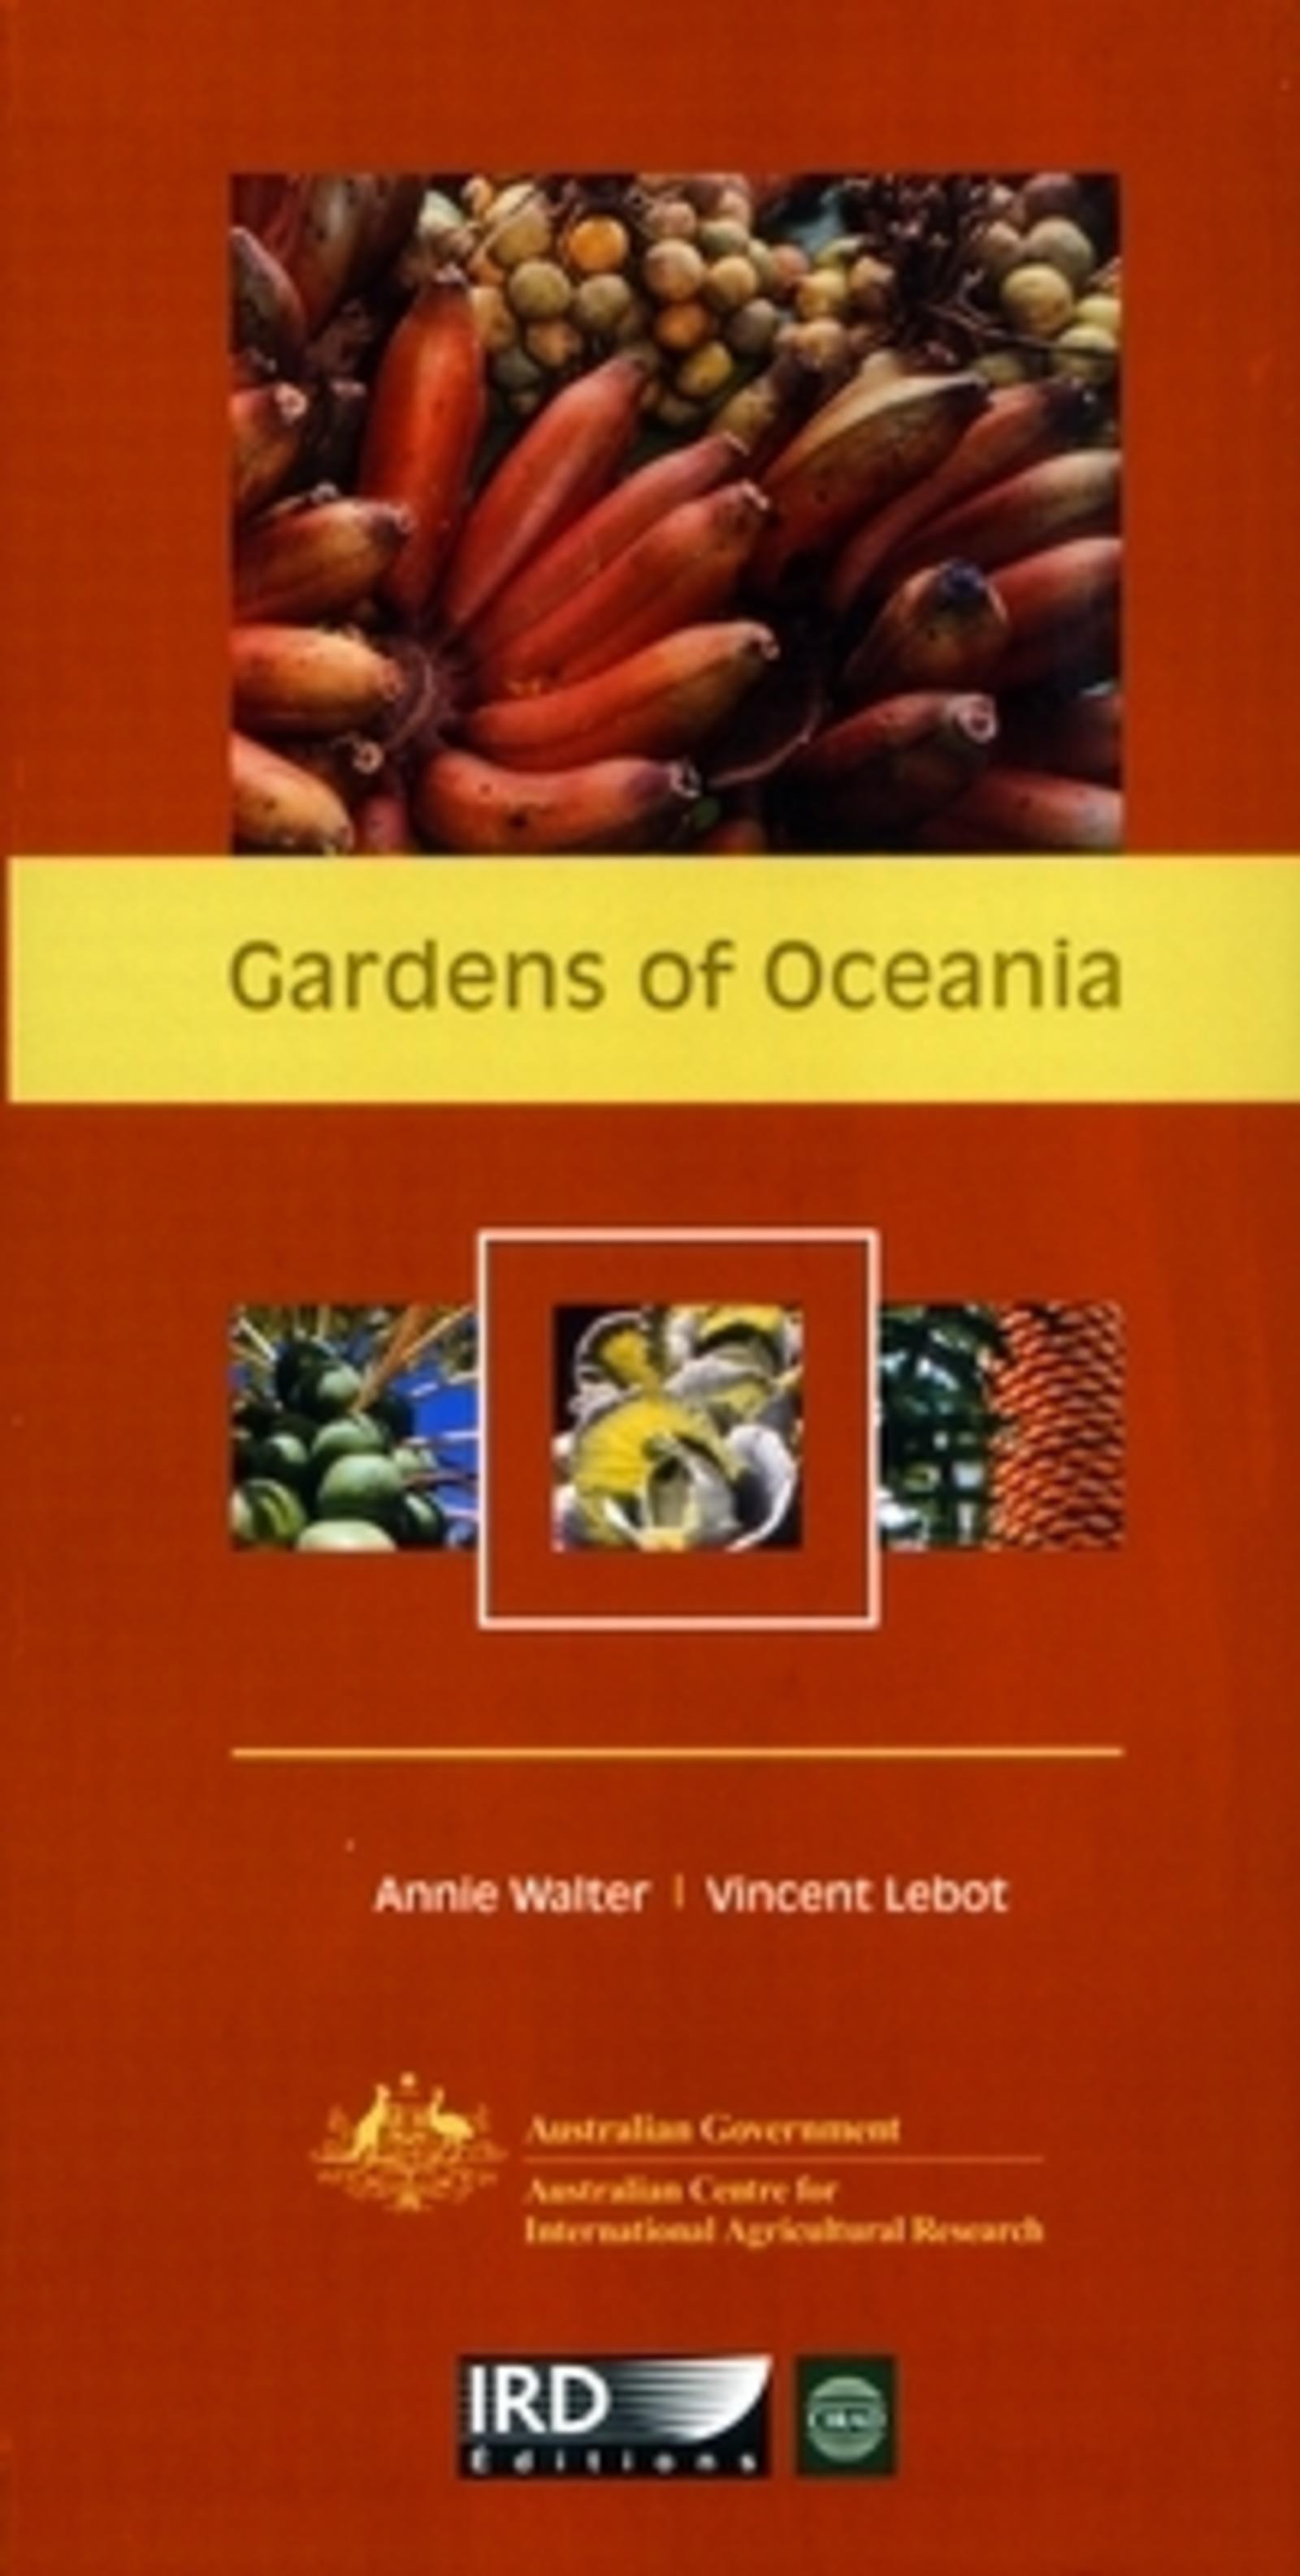 Gardens of Oceania (9782876146488-front-cover)